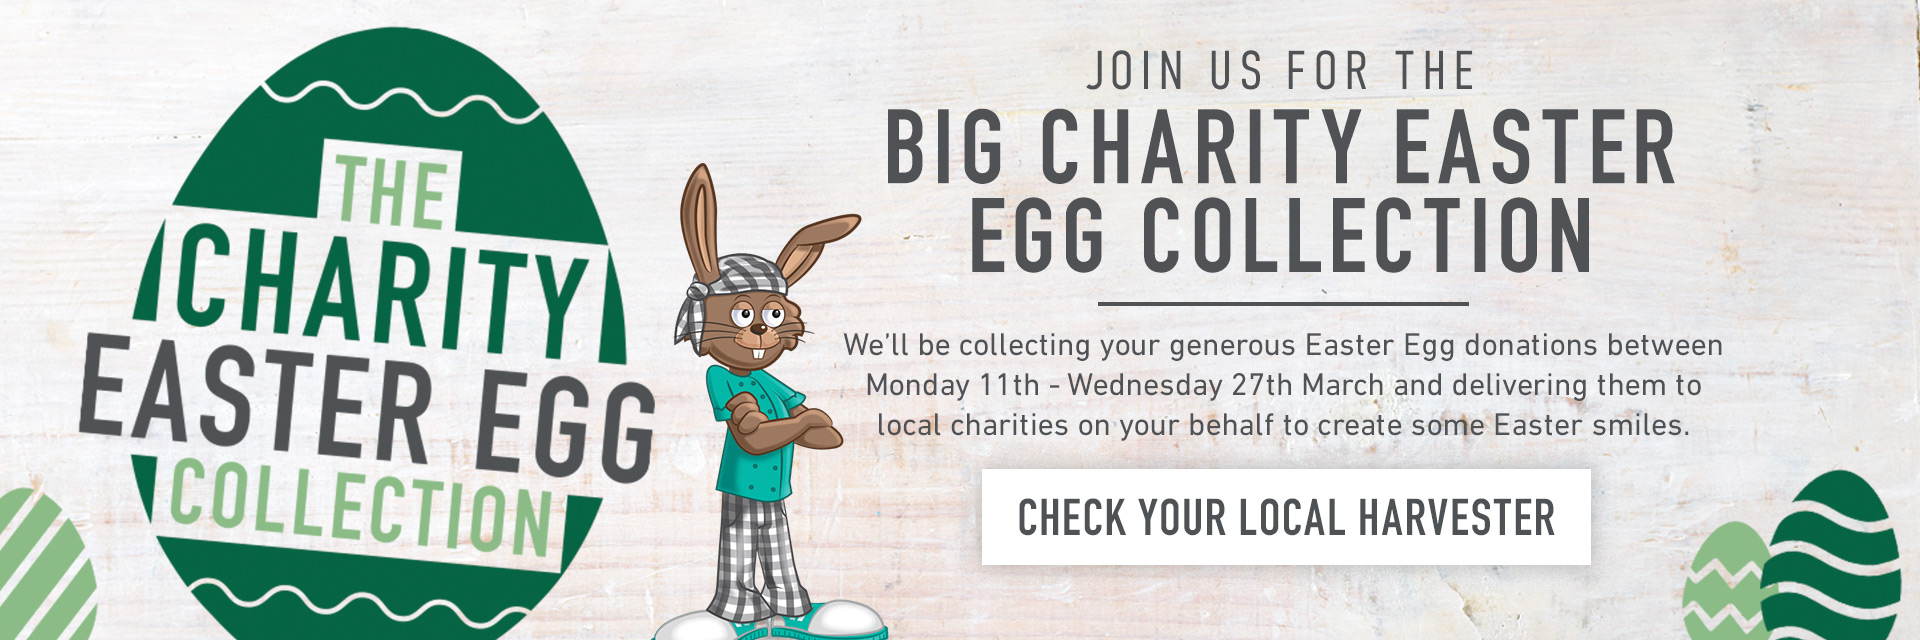 Easter Egg Collection at Harvester Aylesbury 